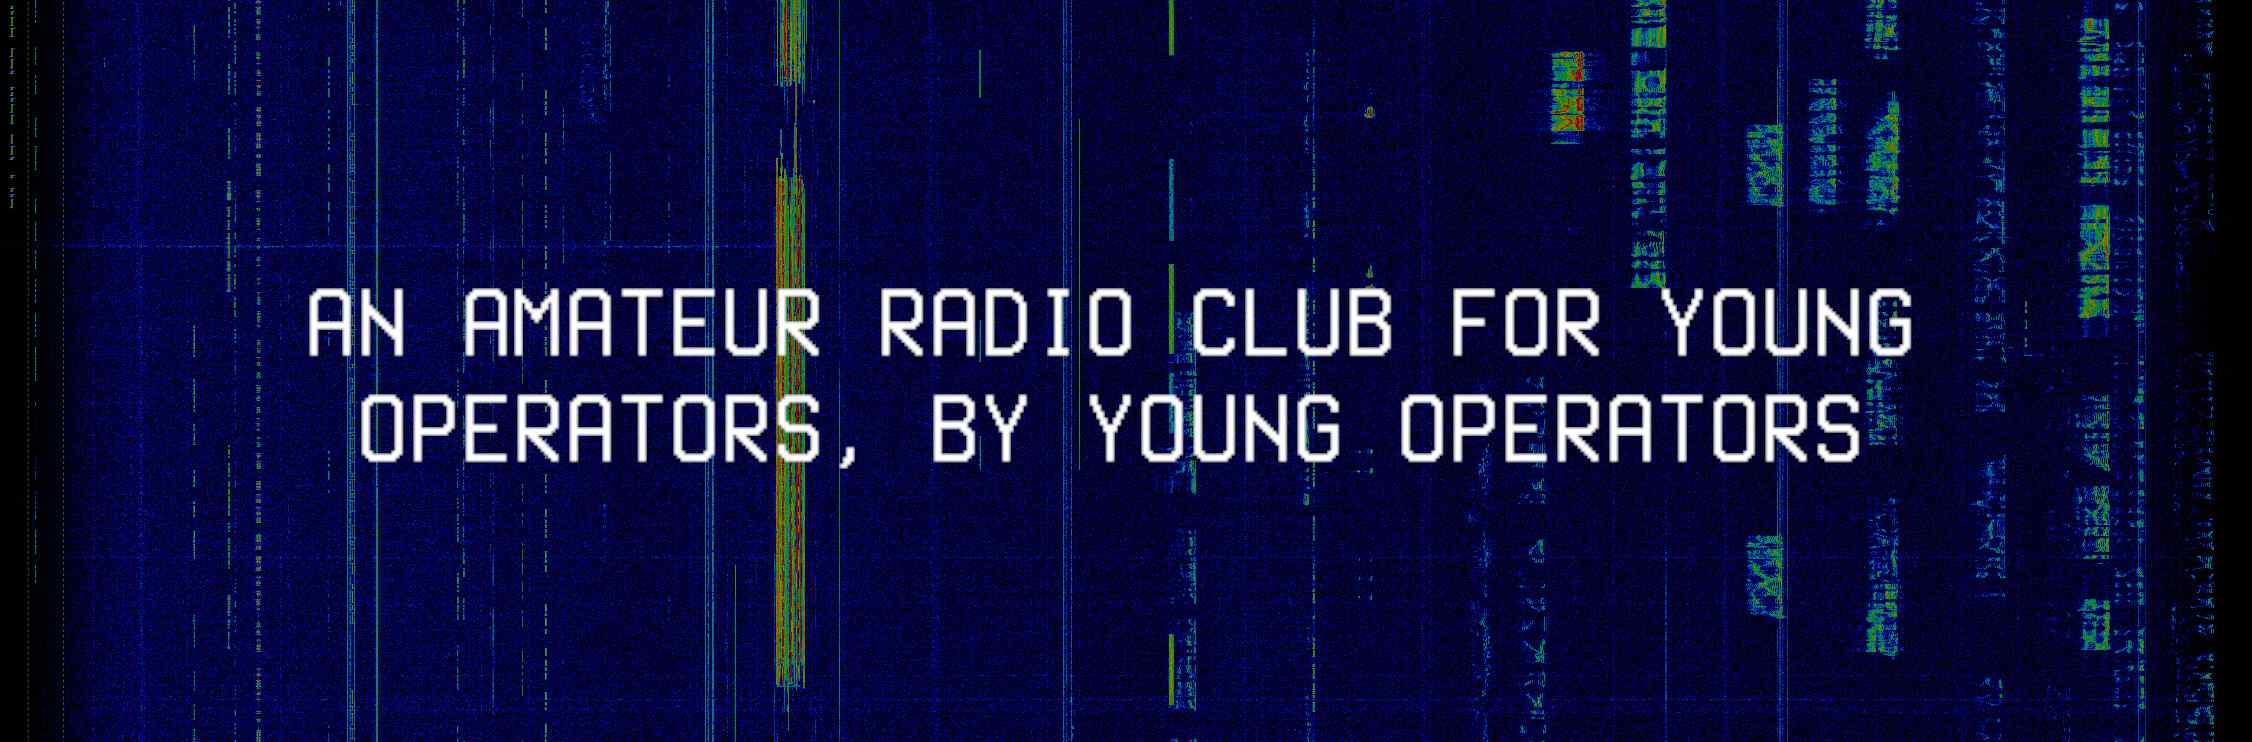 an amateur radio club for young operators, by young operators